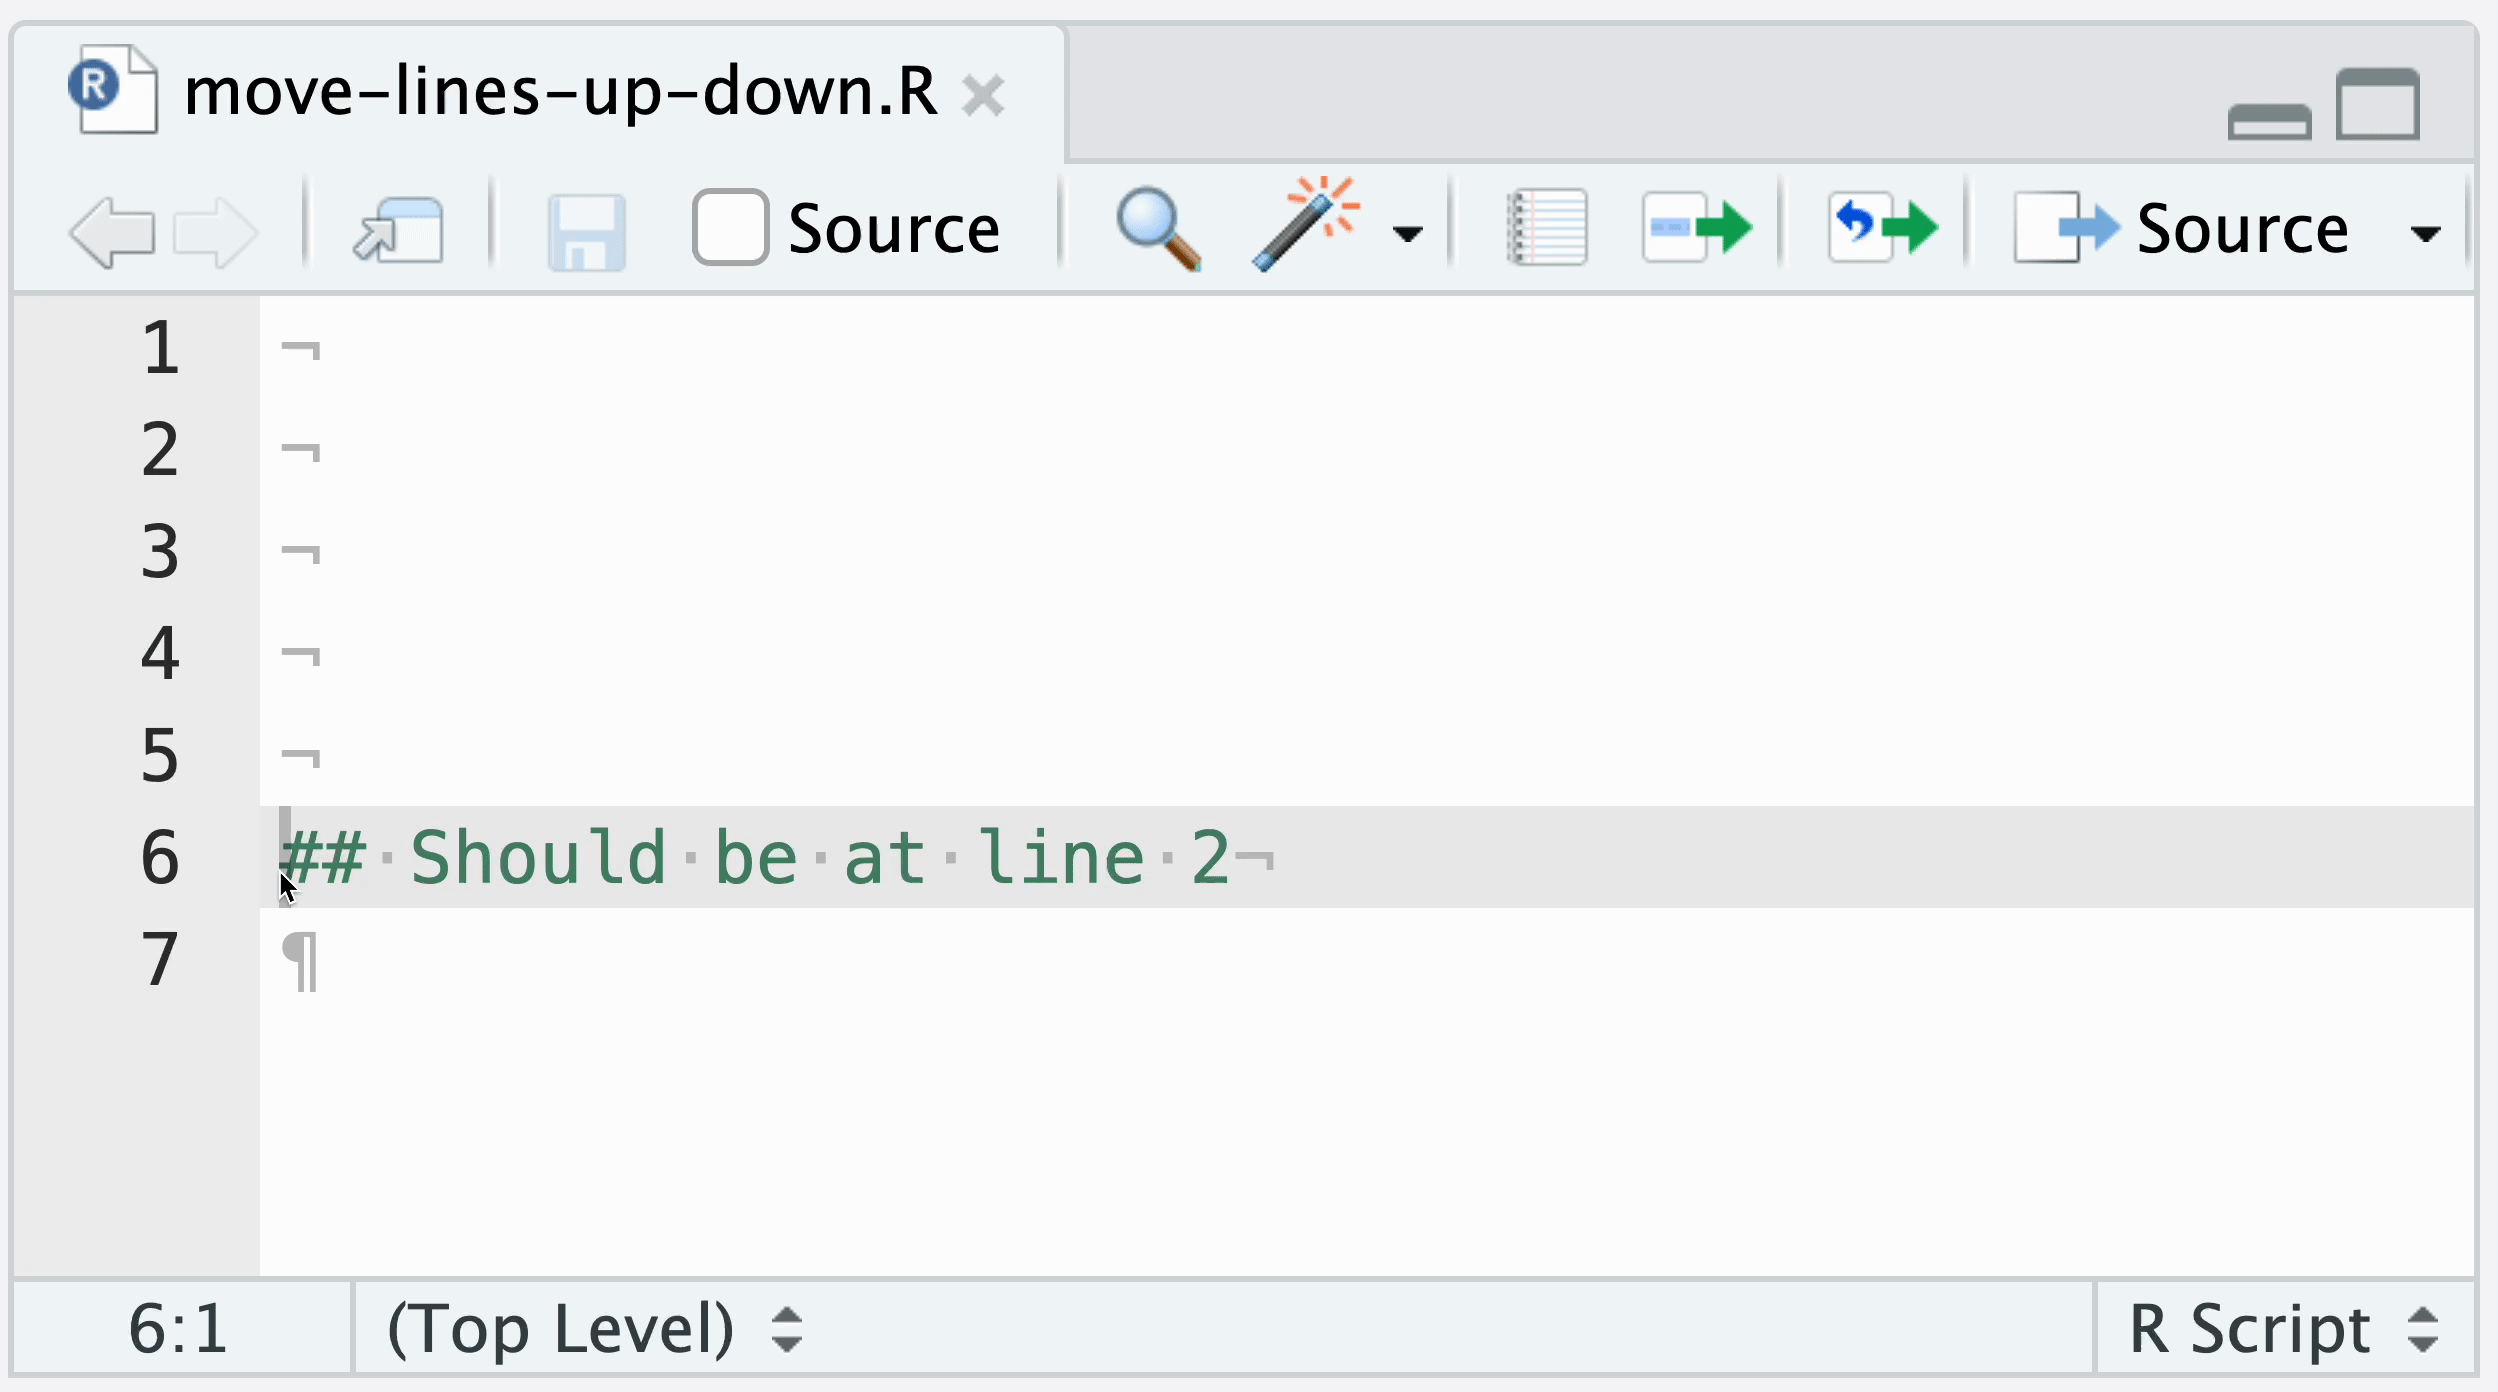 A screencast of an example line of text being moved up with the move lines up/down shortcut